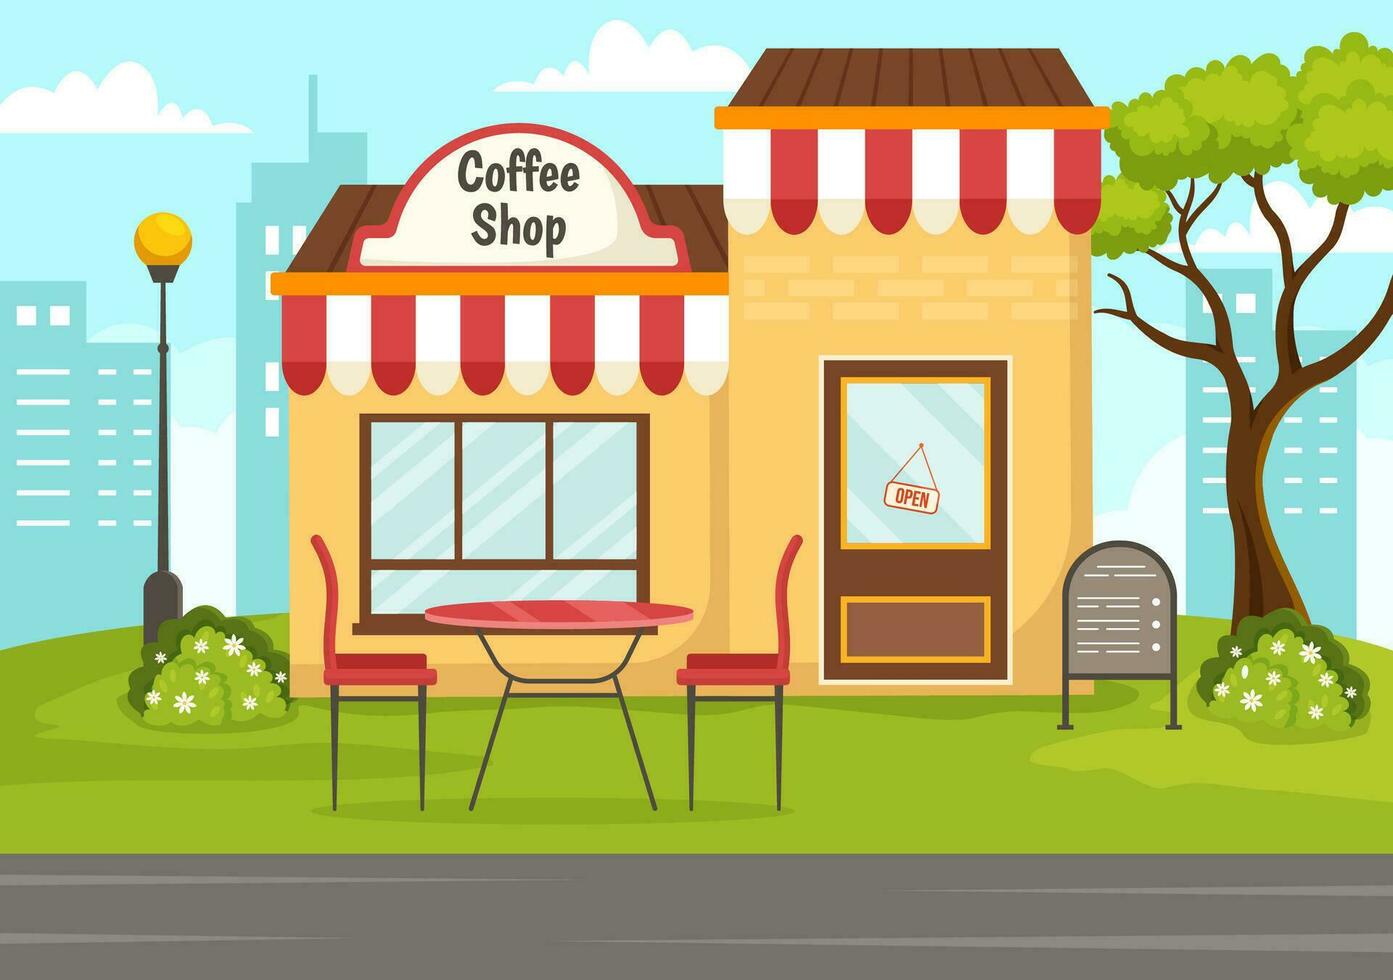 Coffee Shop Vector Illustration with Interior and Furniture Suitable for Poster or Advertisement in Flat Cartoon Background Design